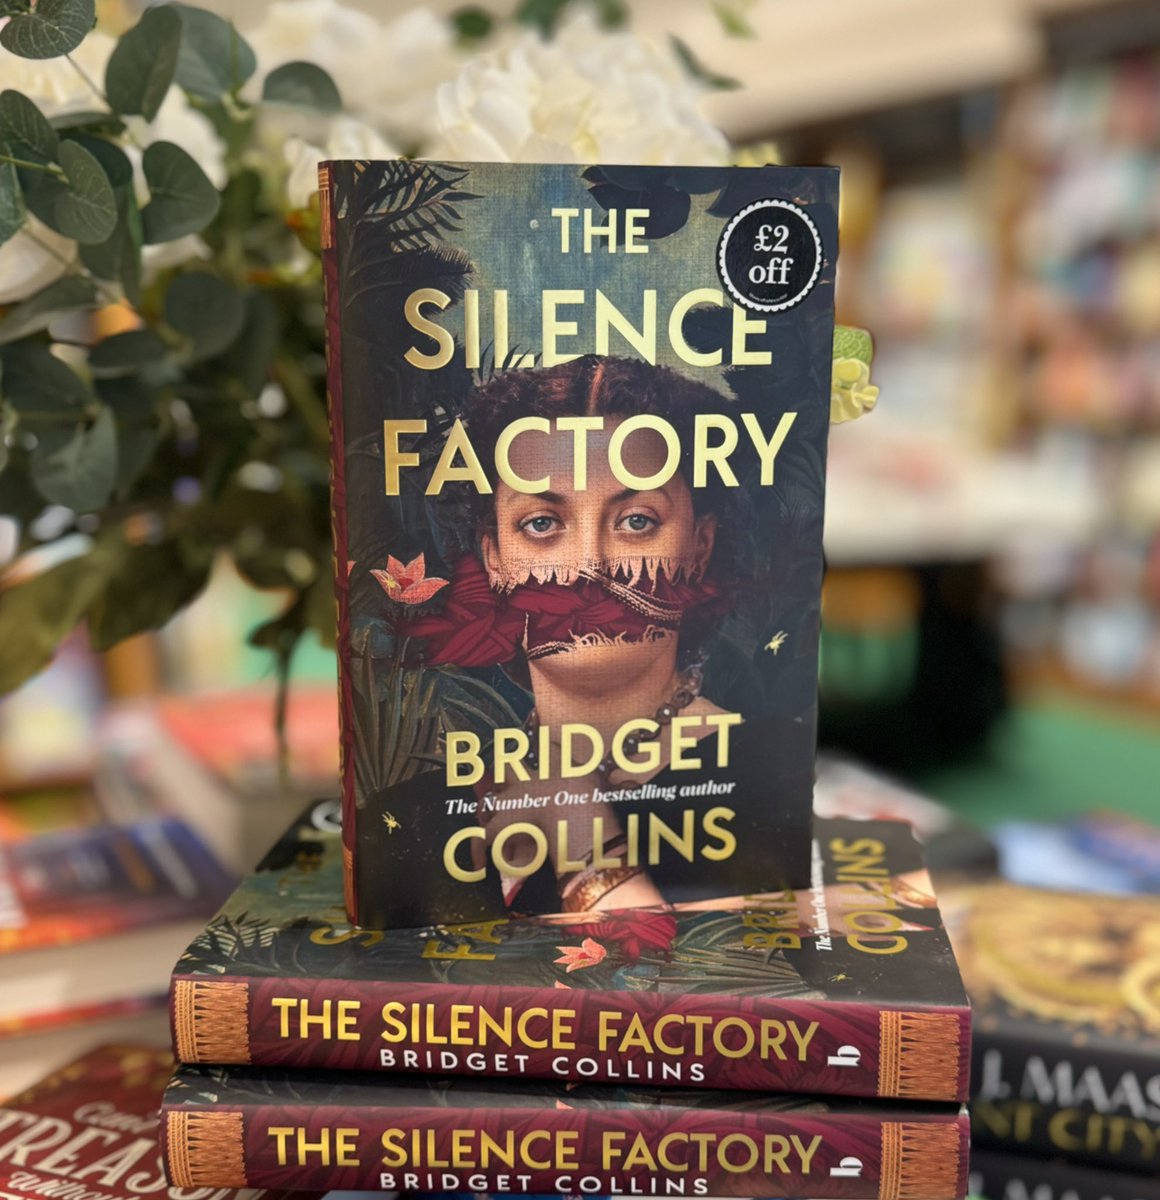 Sunday Times Bestselling author Bridget Collins’ highly anticipated “The Silence Factory” has arrived!! A breathtaking tale of a man whose search for silence leads him into a world on the edge of time and magic.